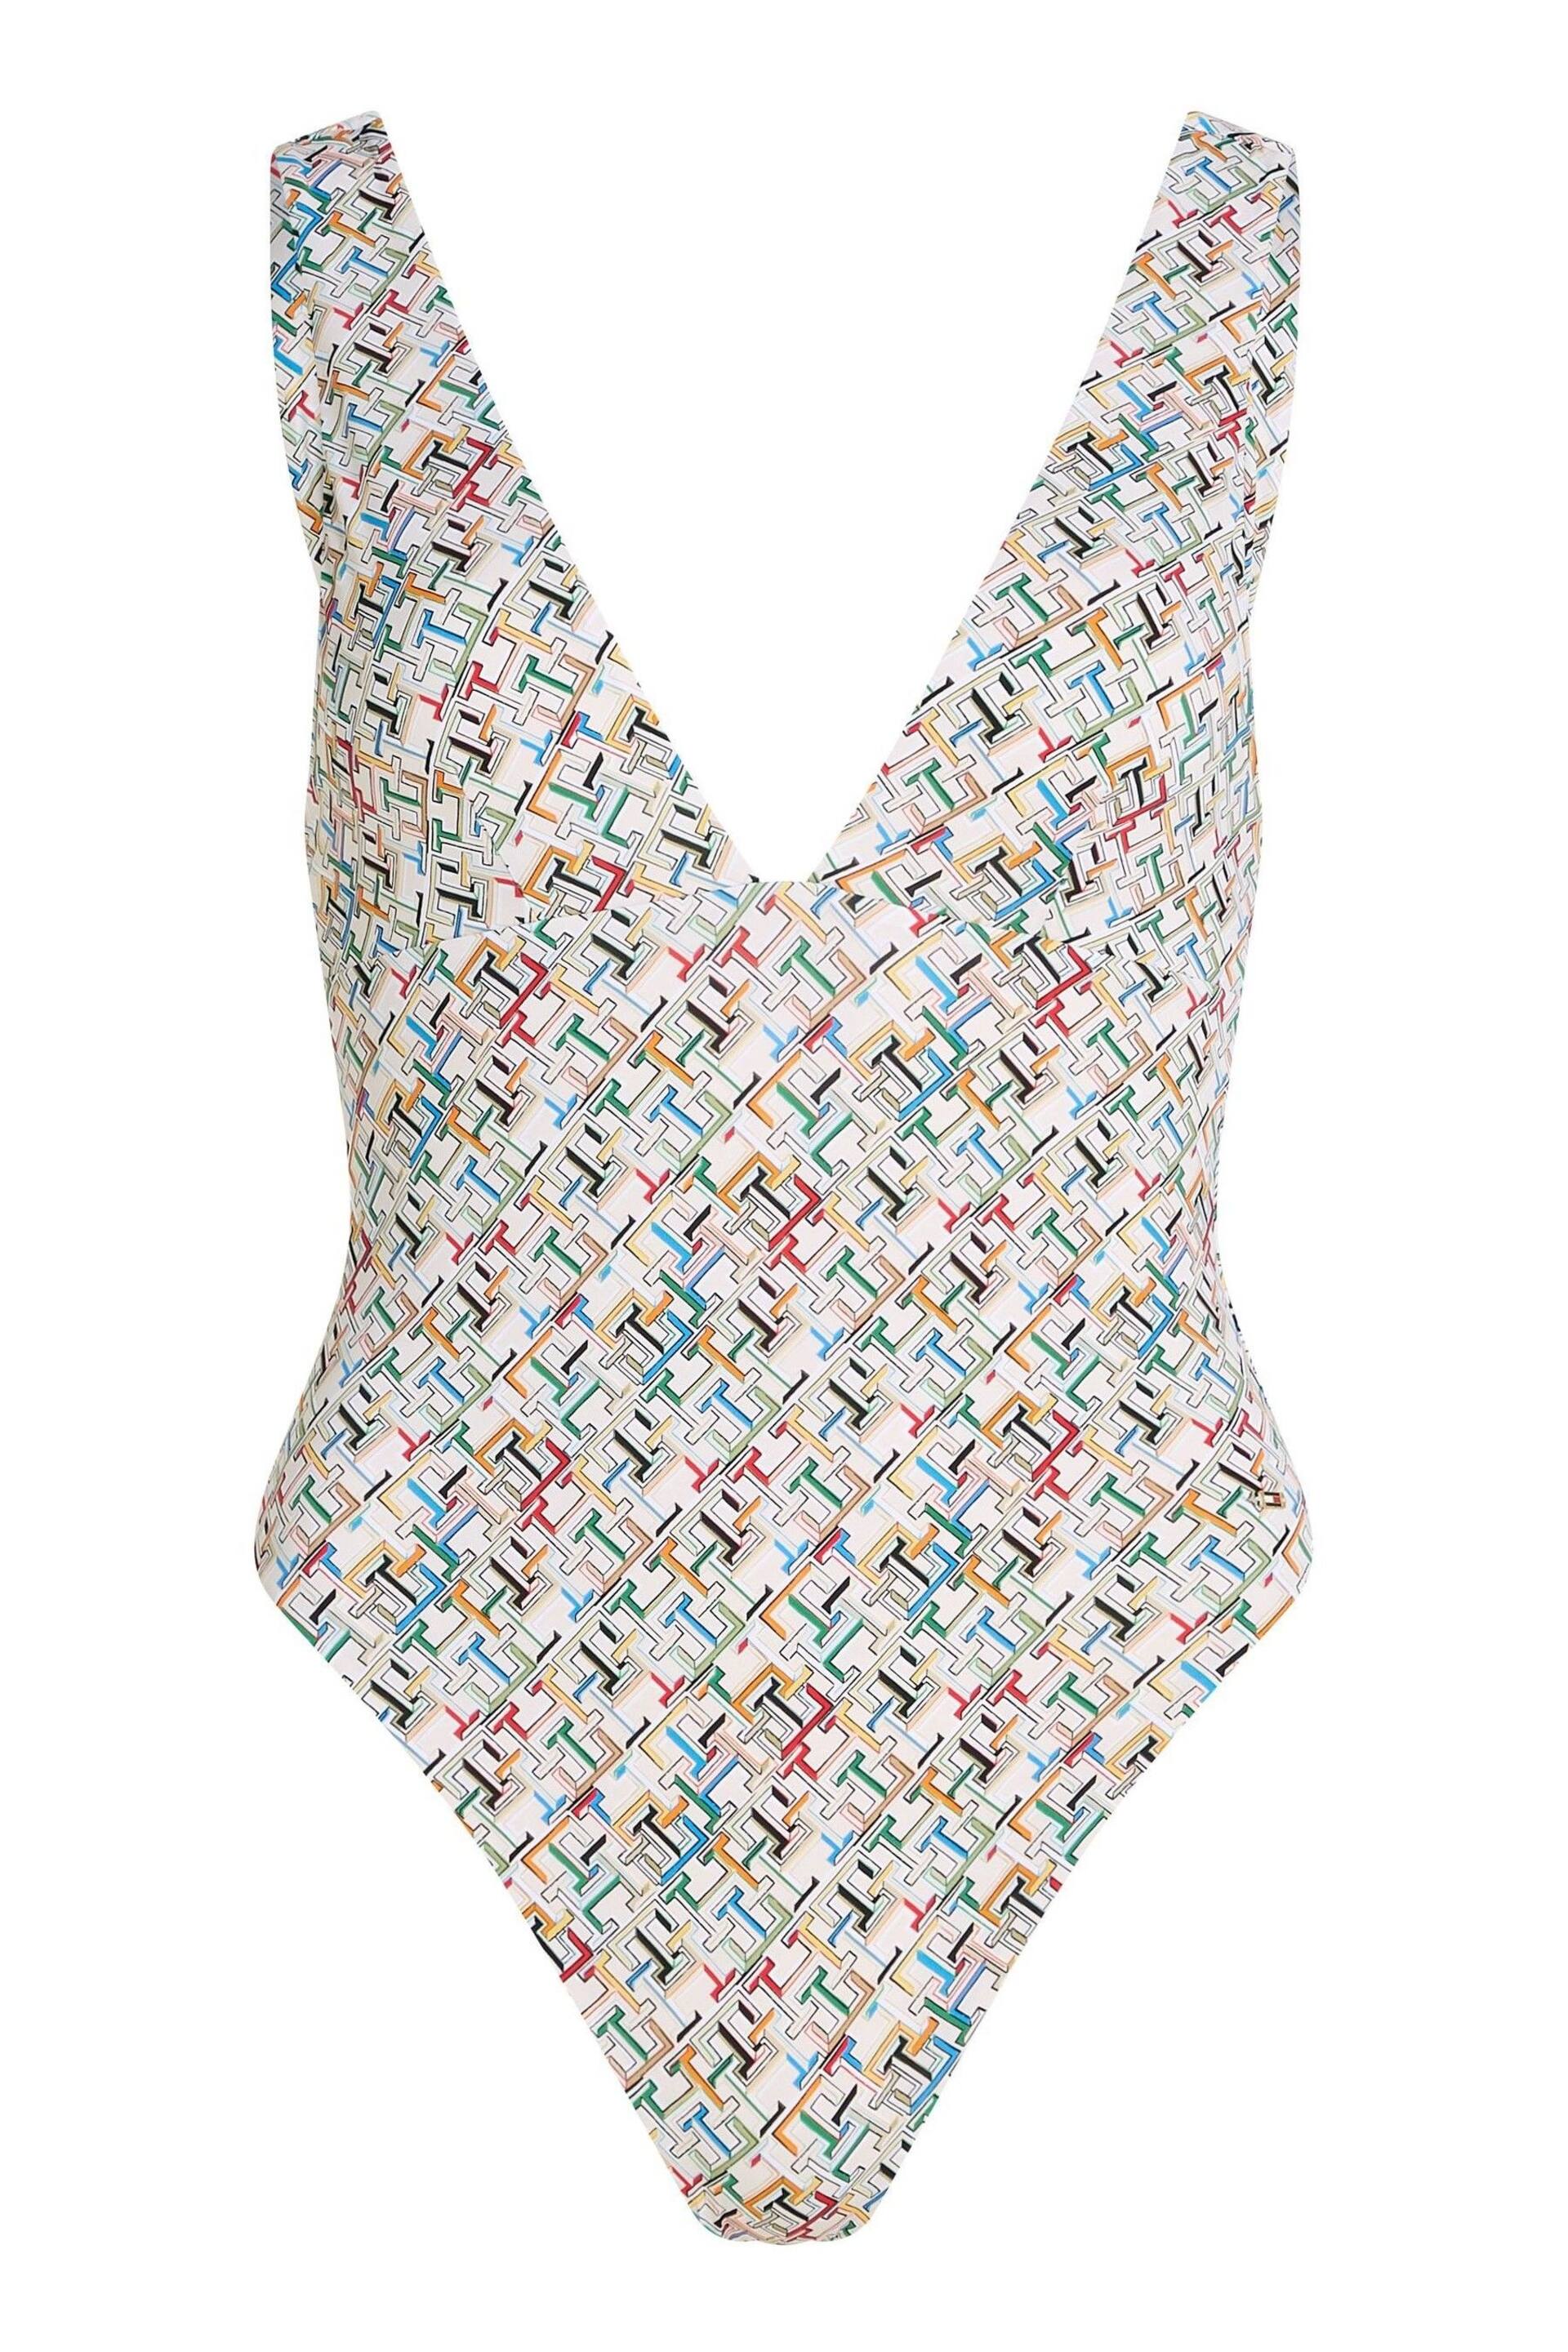 Tommy Hilfiger Cream Plunge One Piece Swimsuit - Image 4 of 6